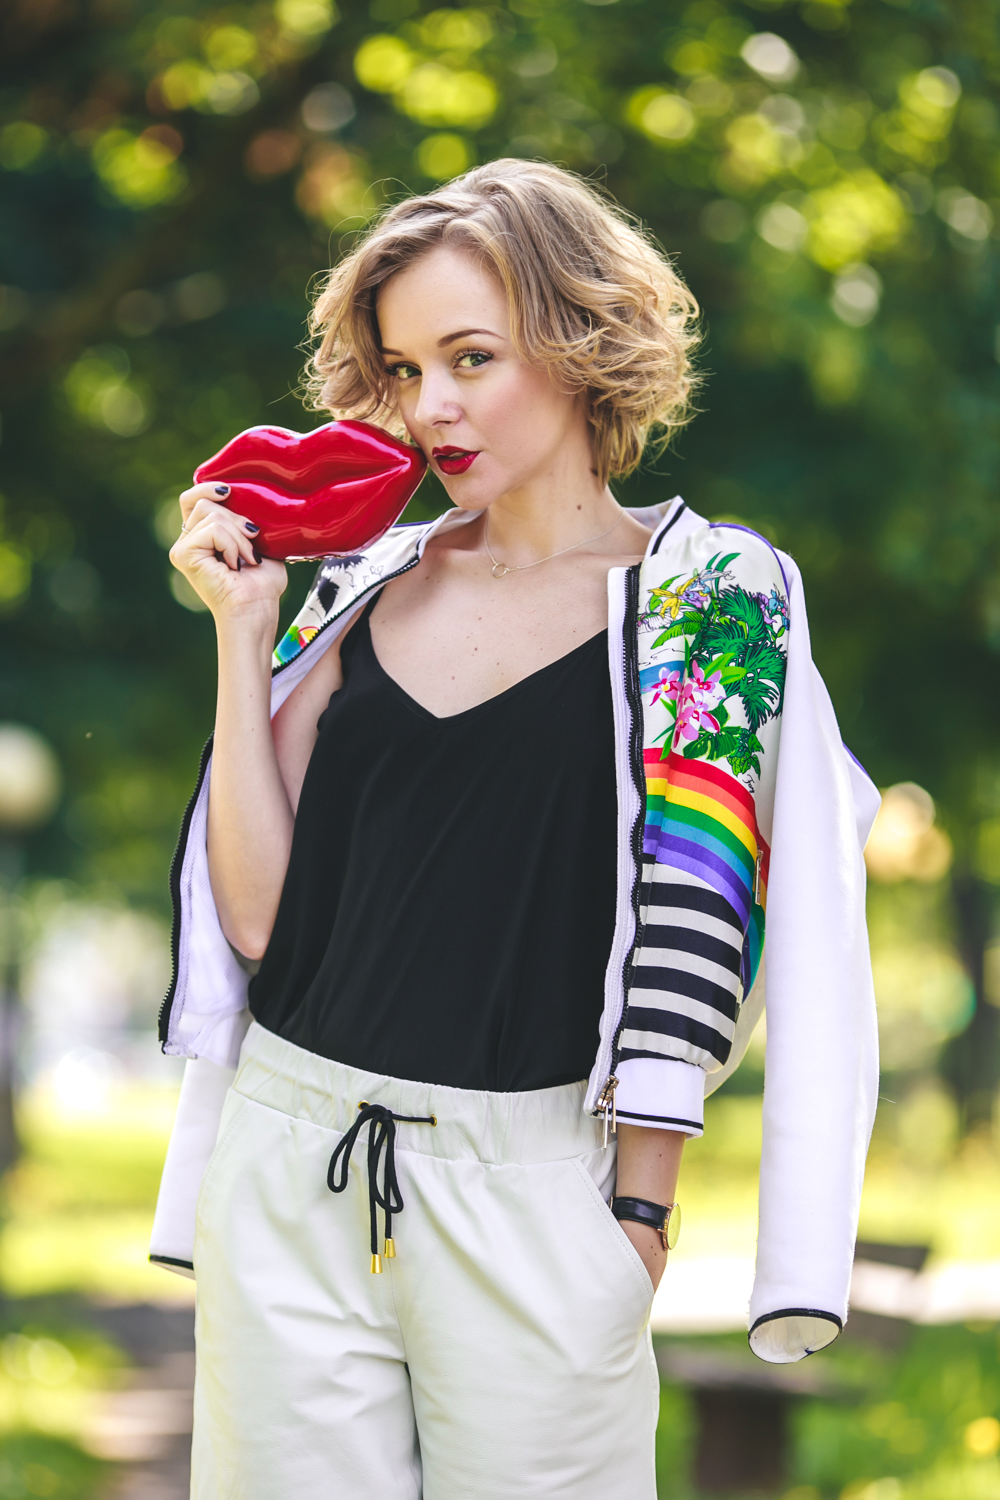 darya kamalova fashion blogger from thecablook is wearing fay snoopy jacket asos white leather shorts cami black top lips vintage clutch-7626